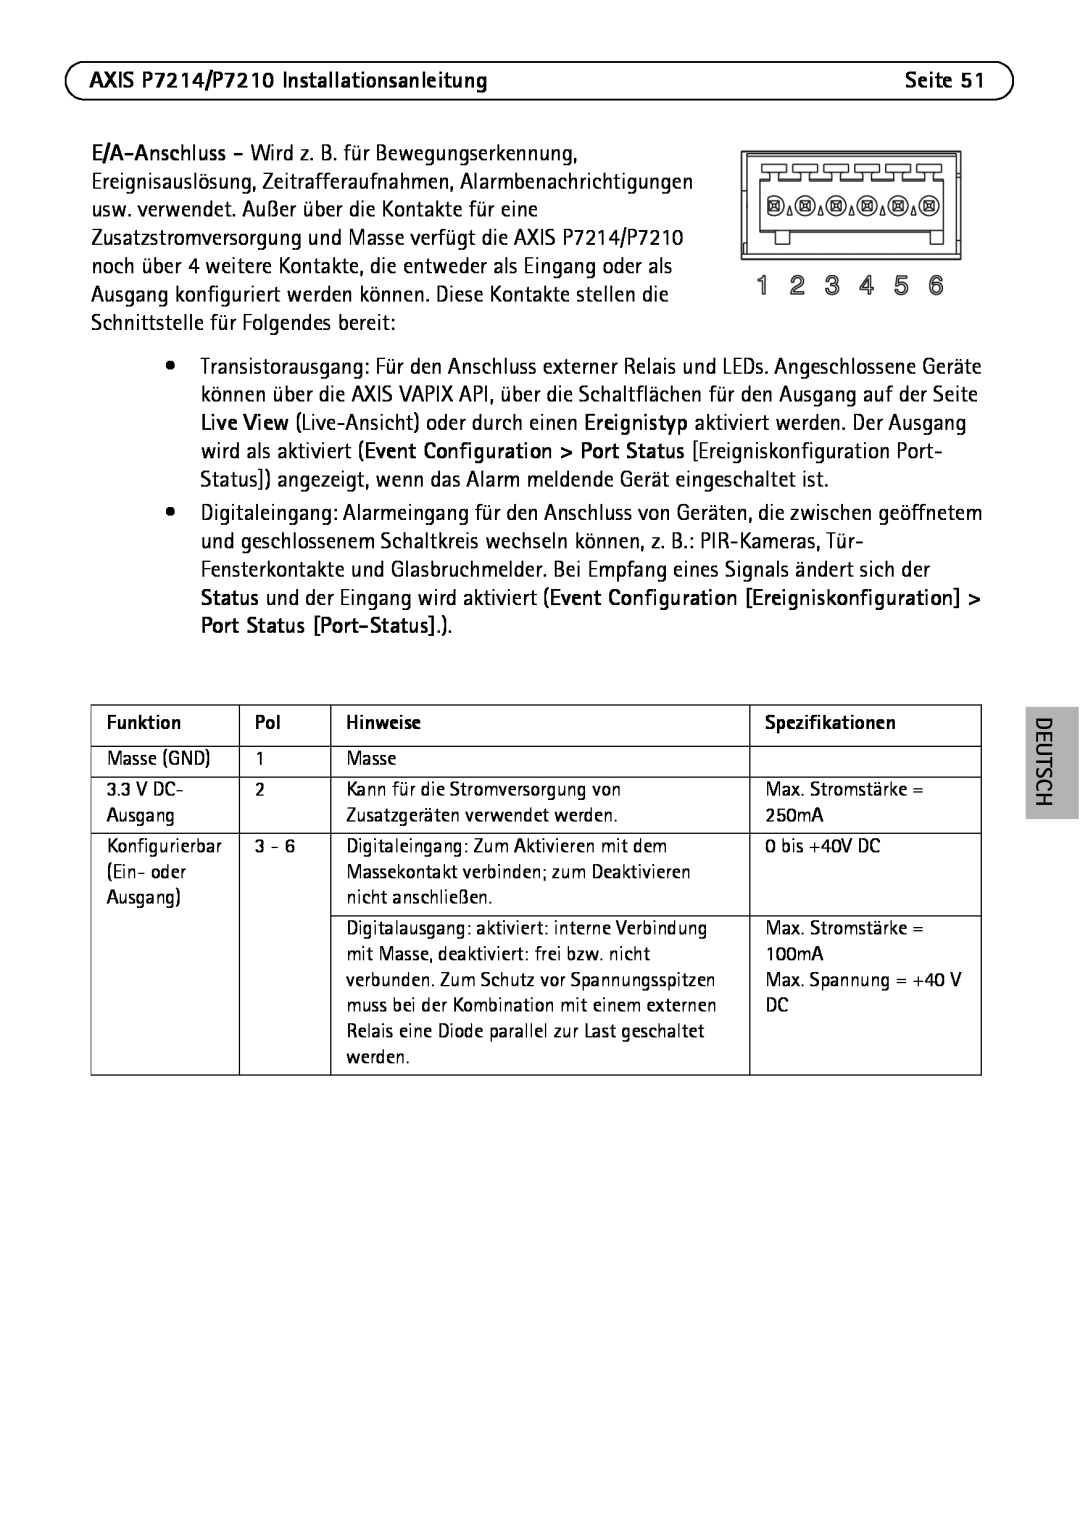 Axis Communications manual AXIS P7214/P7210 Installationsanleitung, Funktion, Hinweise, Spezifikationen, Konfigurierbar 